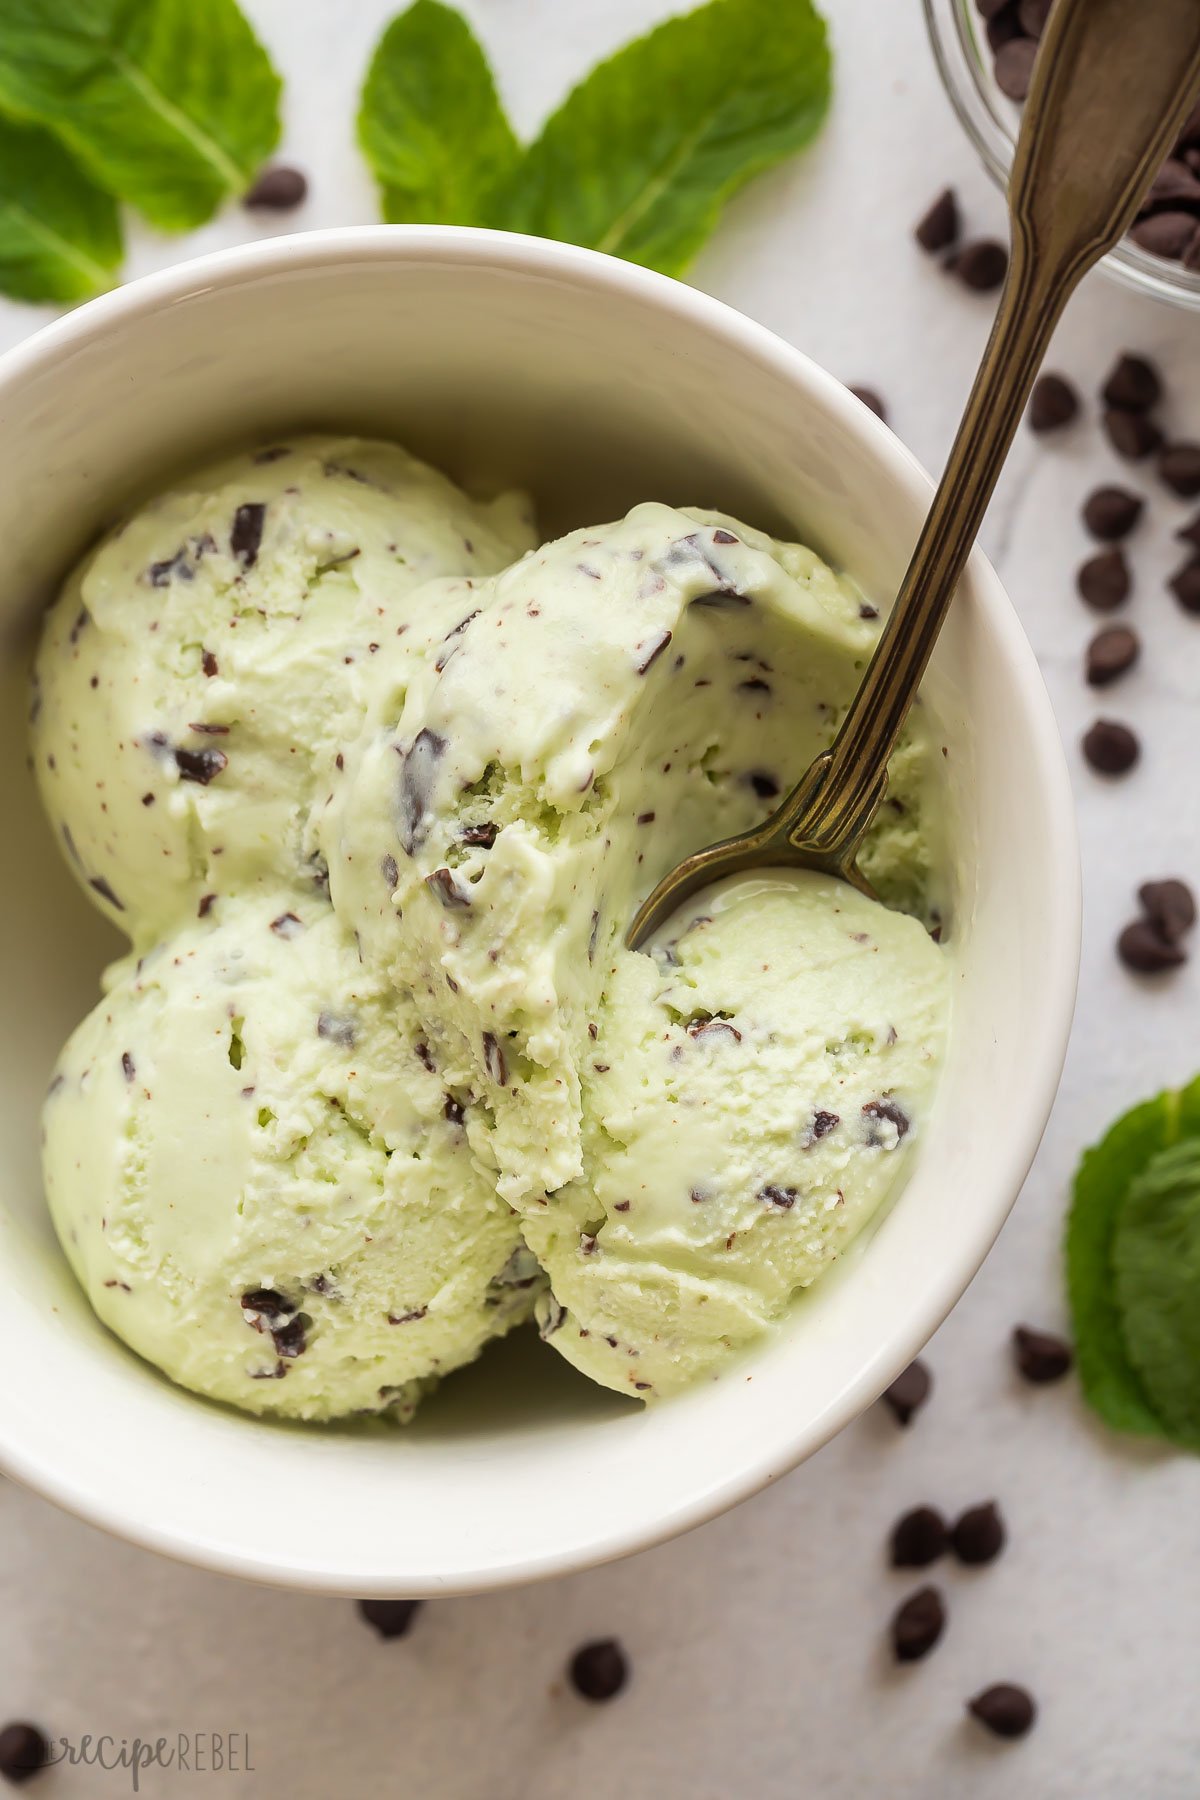 close up image of spoon scooping mint ice cream from bowl.